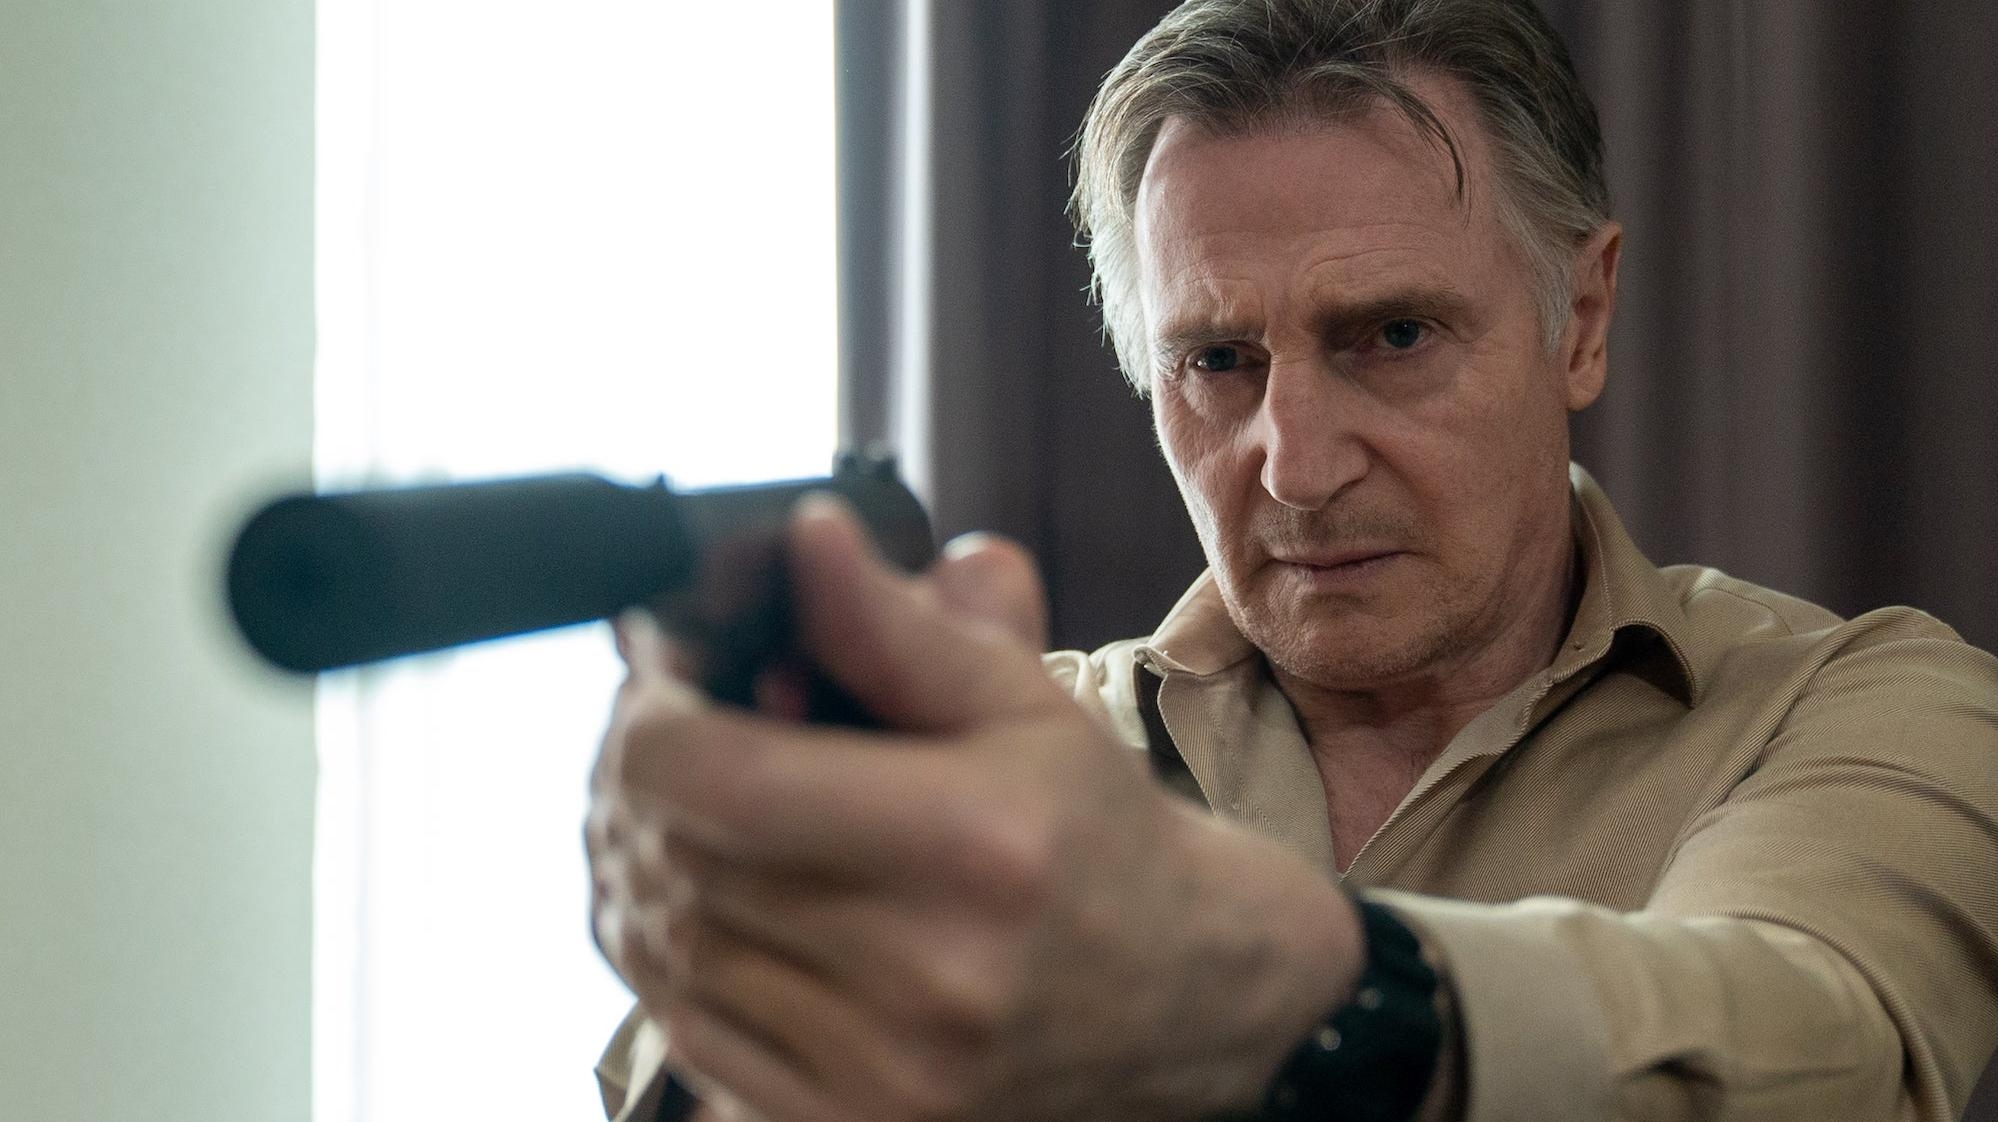 Man of action Liam Neeson on exploring the ‘shades of gray’ that differentiate Memory